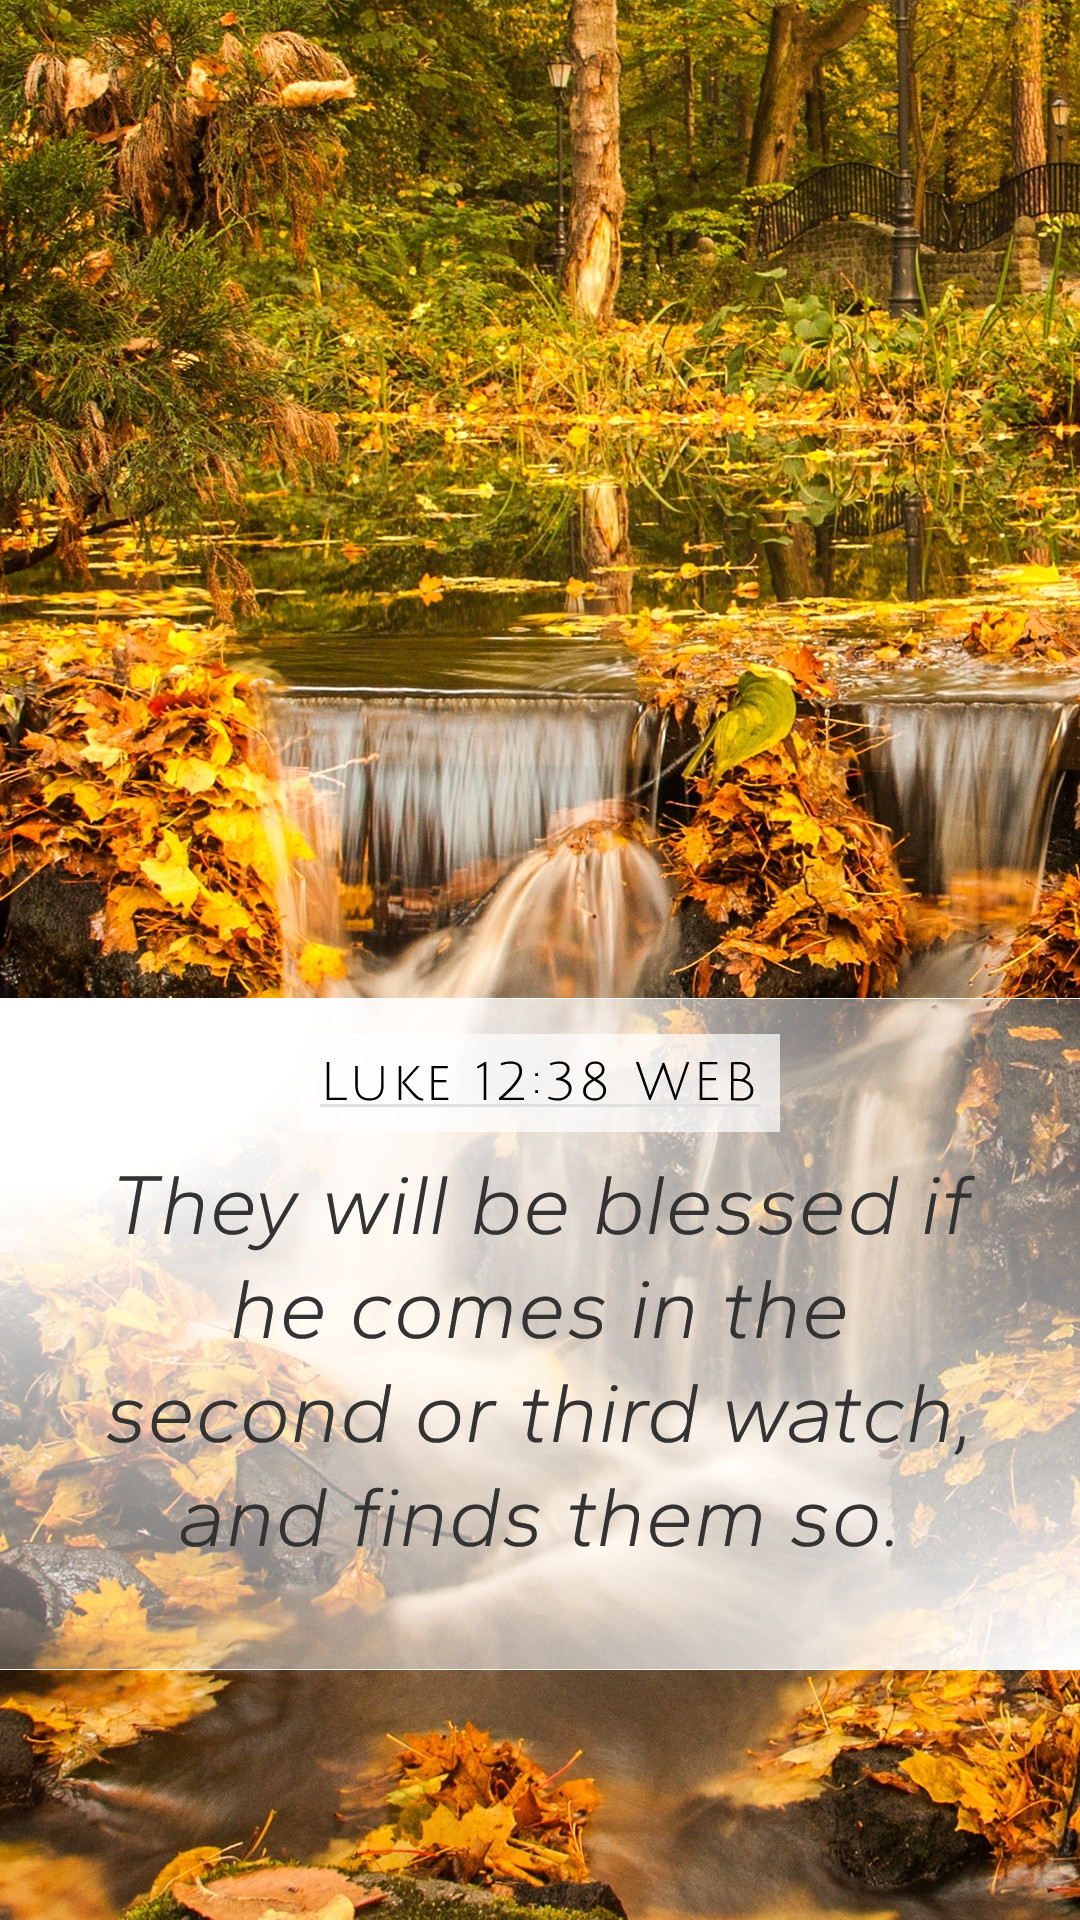 Luke 12:38 WEB Mobile Phone Wallpaper will be blessed if he comes in the second or